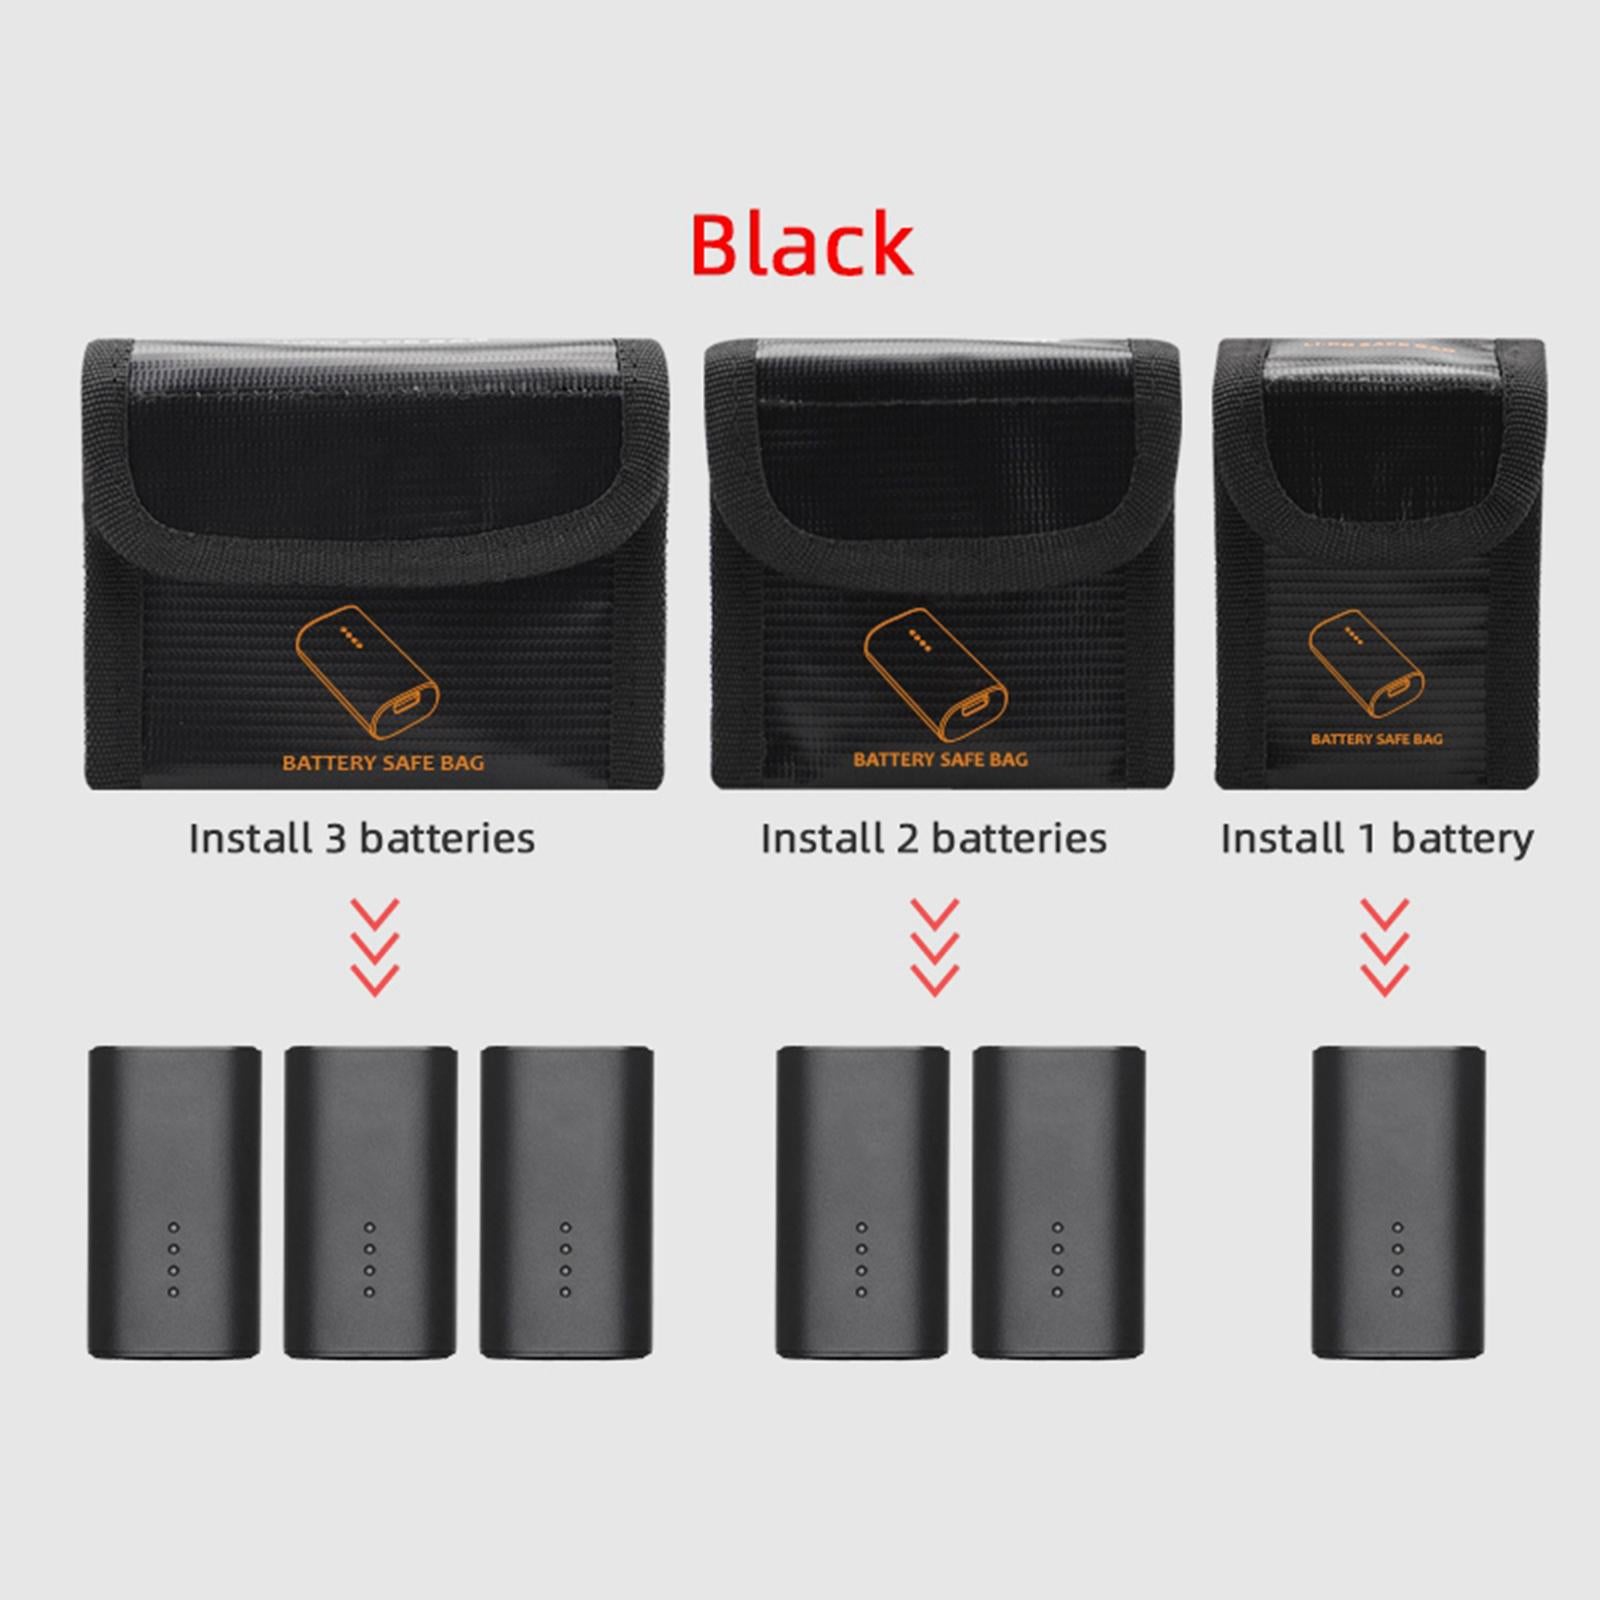 (9x11.3x5cm Waterproof Explosion-Proof Battery Safety Bag for DJI Racing Black L